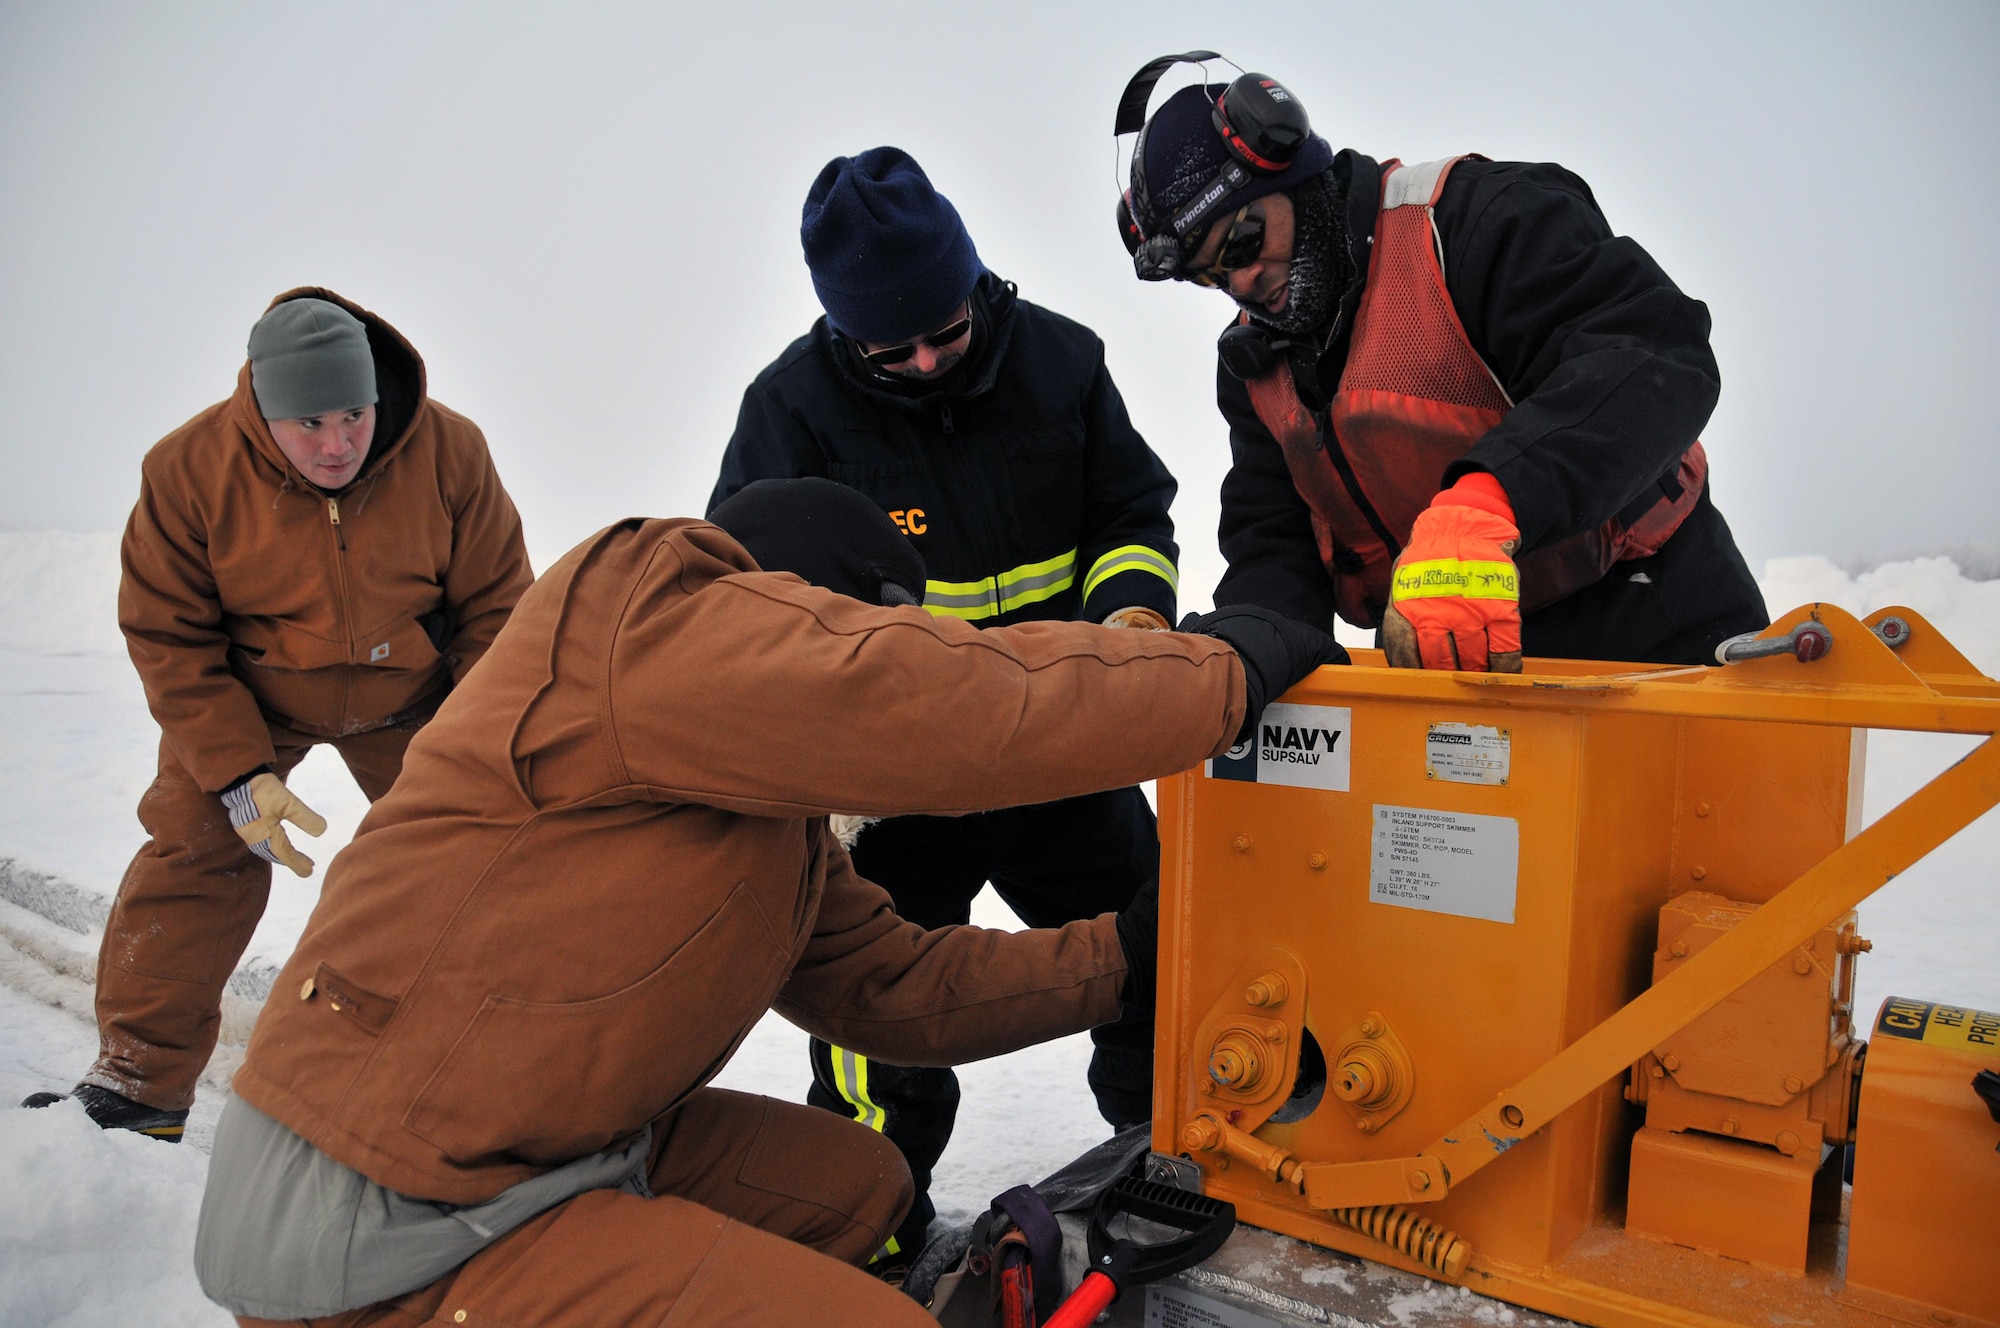 Members of the Alaska Department of Environmental Conservation, 611th Civil Engineer Squadron, and U.S. Navy Supervisor of Salvage and Diving set up the rope mop skimmer during an Arctic oil spill response exercise Feb. 4, 2015, in Alaska. A trench is dug a certain depth in the ice and holes are drilled to allow the oil/product to rise up into the trench to be collected. The skimmer rotates through the trench collecting the oil and sends it to a holding tank. The units participated in the exercise to learn Arctic spill response tactics and techniques. (U.S. Air Force photo/Tech. Sgt. John Gordinier)